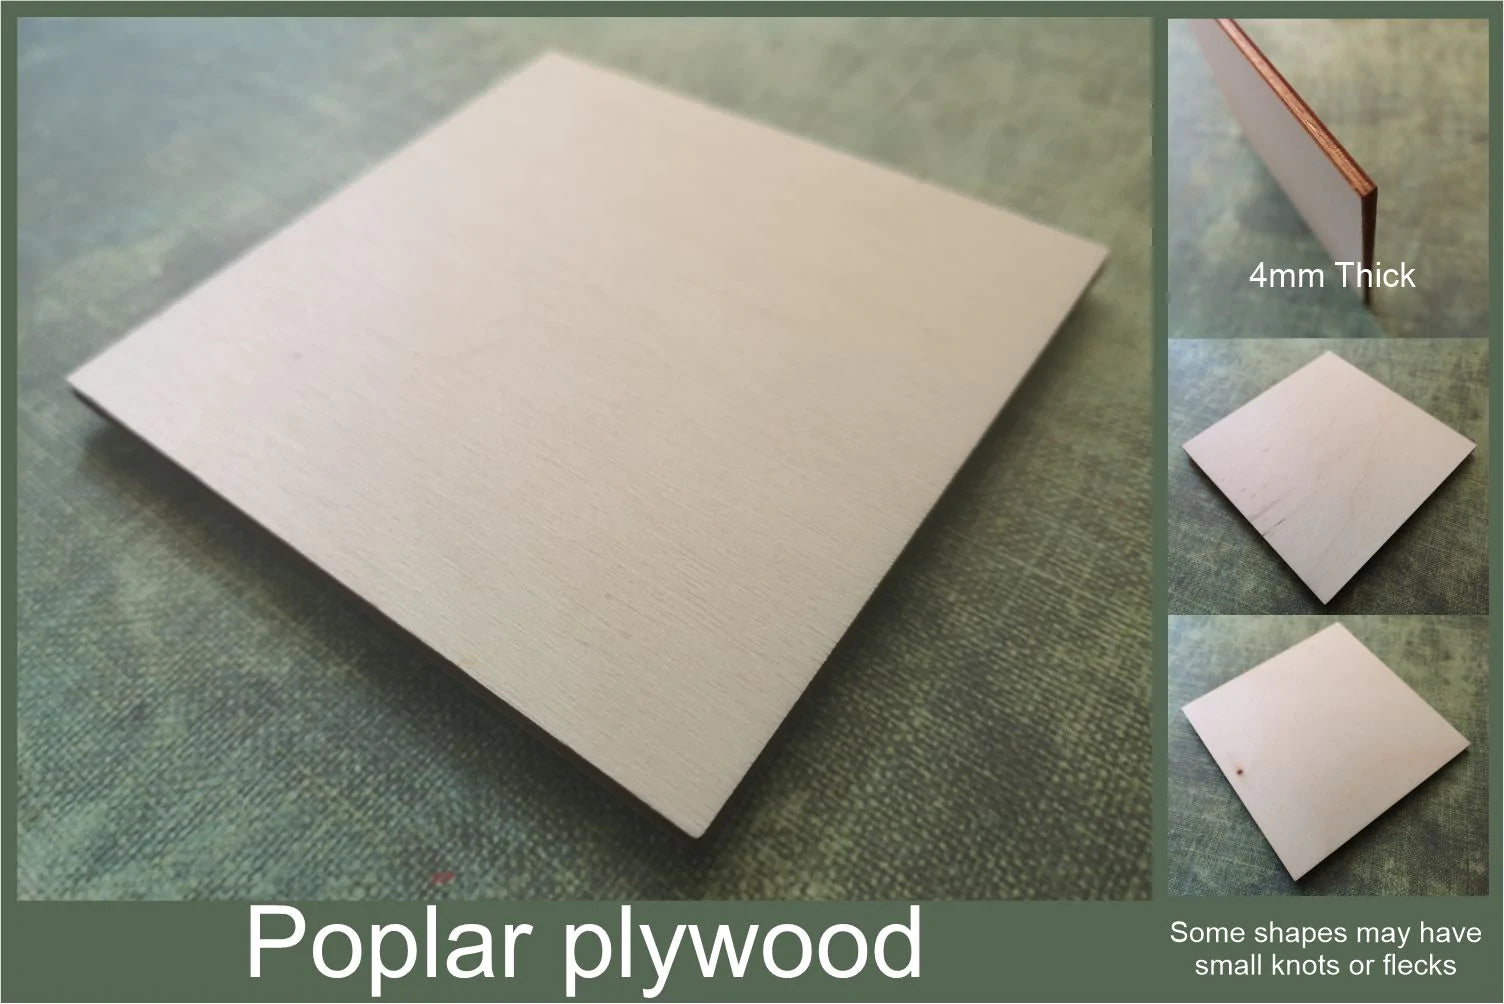 4mm thick poplar plywood used to make the Hippo cut-outs ready for crafting